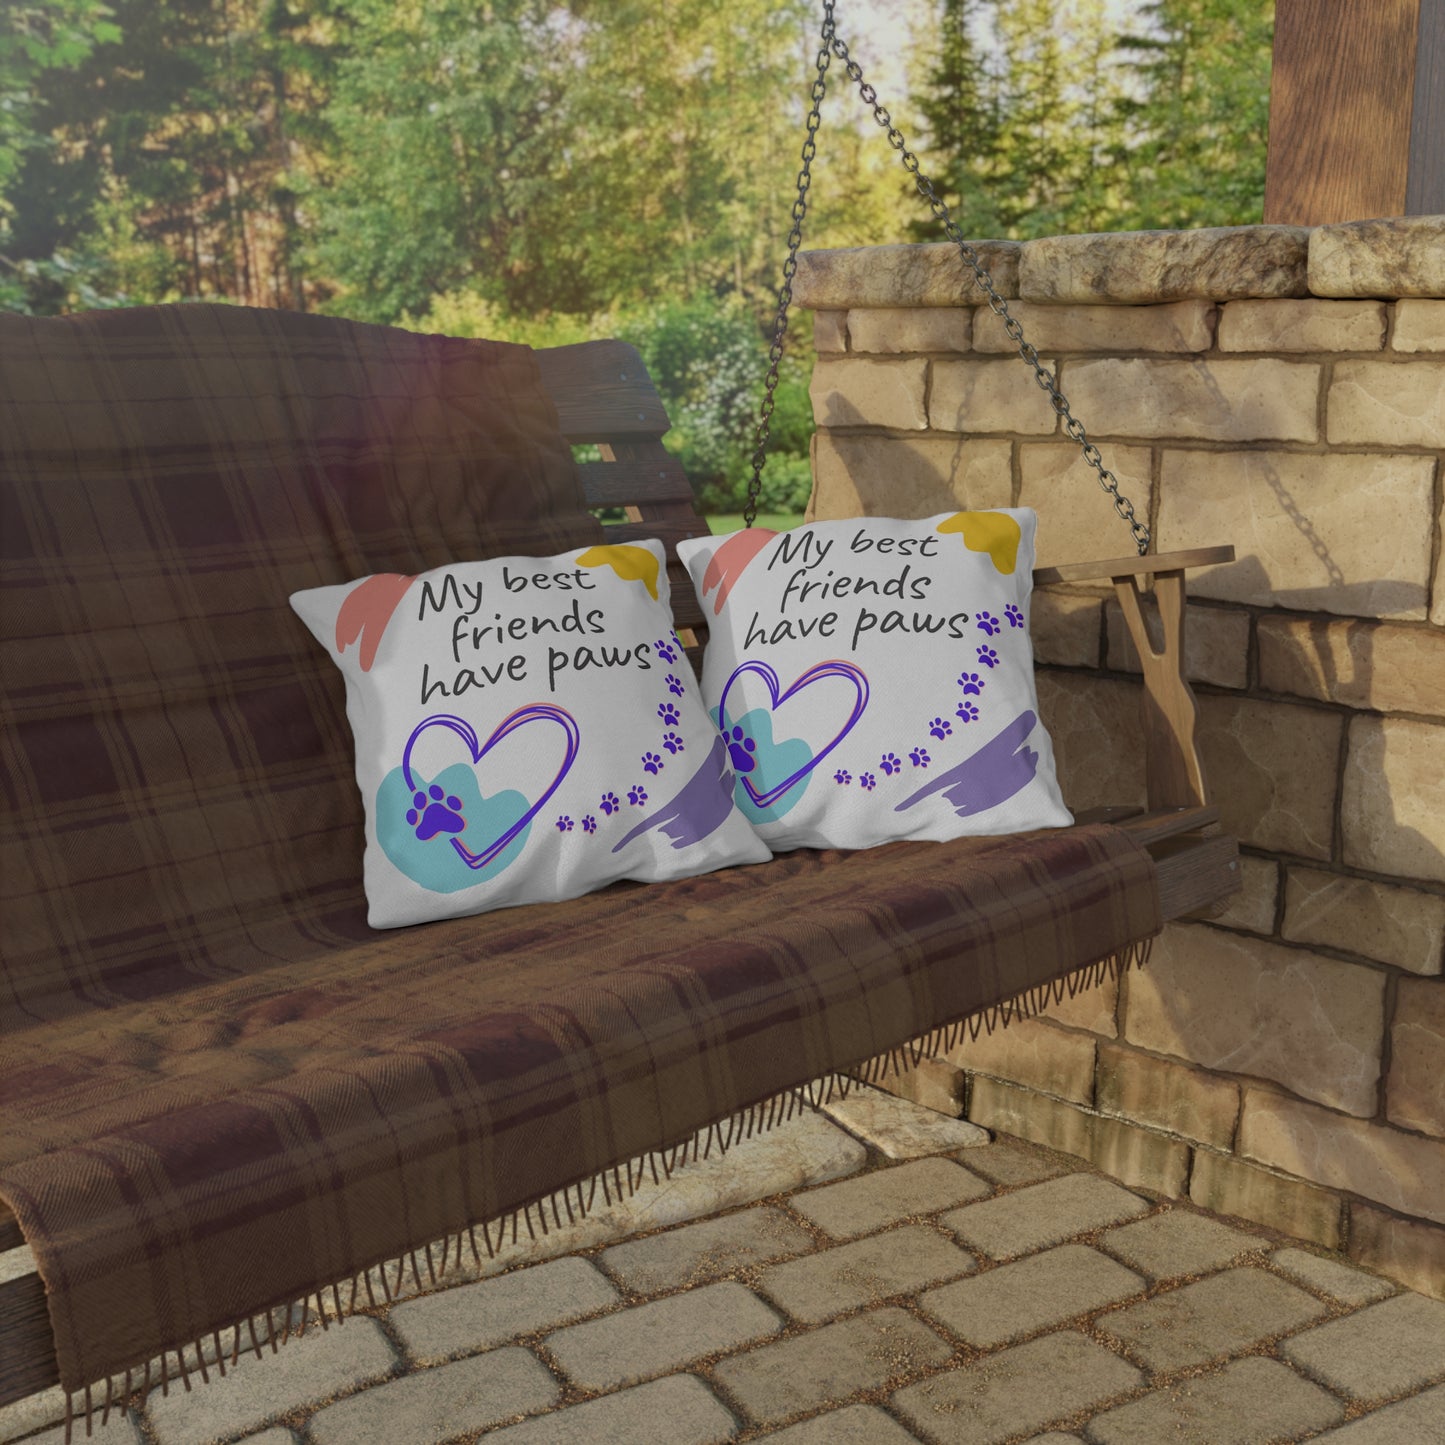 Pet-Lover Patio Pillow, "My Best Friends Have Paws" Design, UV- and Mildew-Resistant